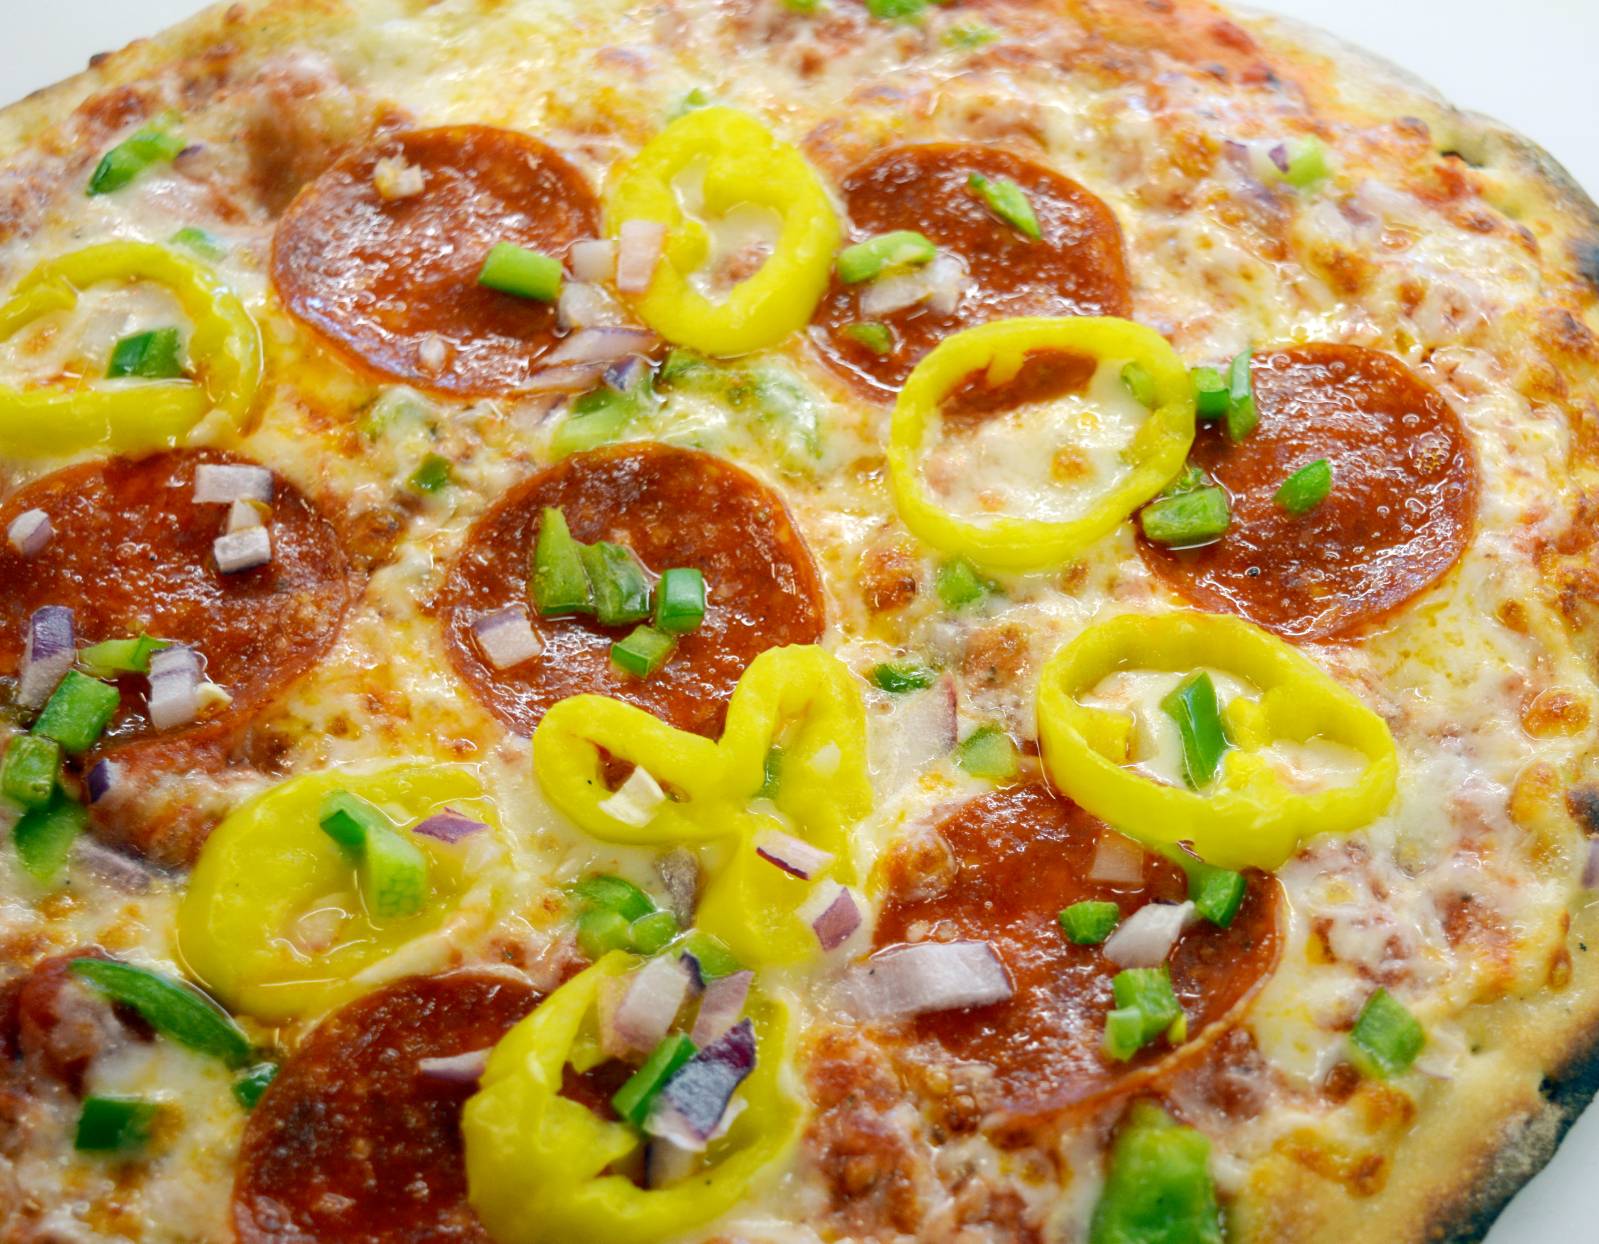 Close-up photograph of a pizza with pepperoni and peppers.